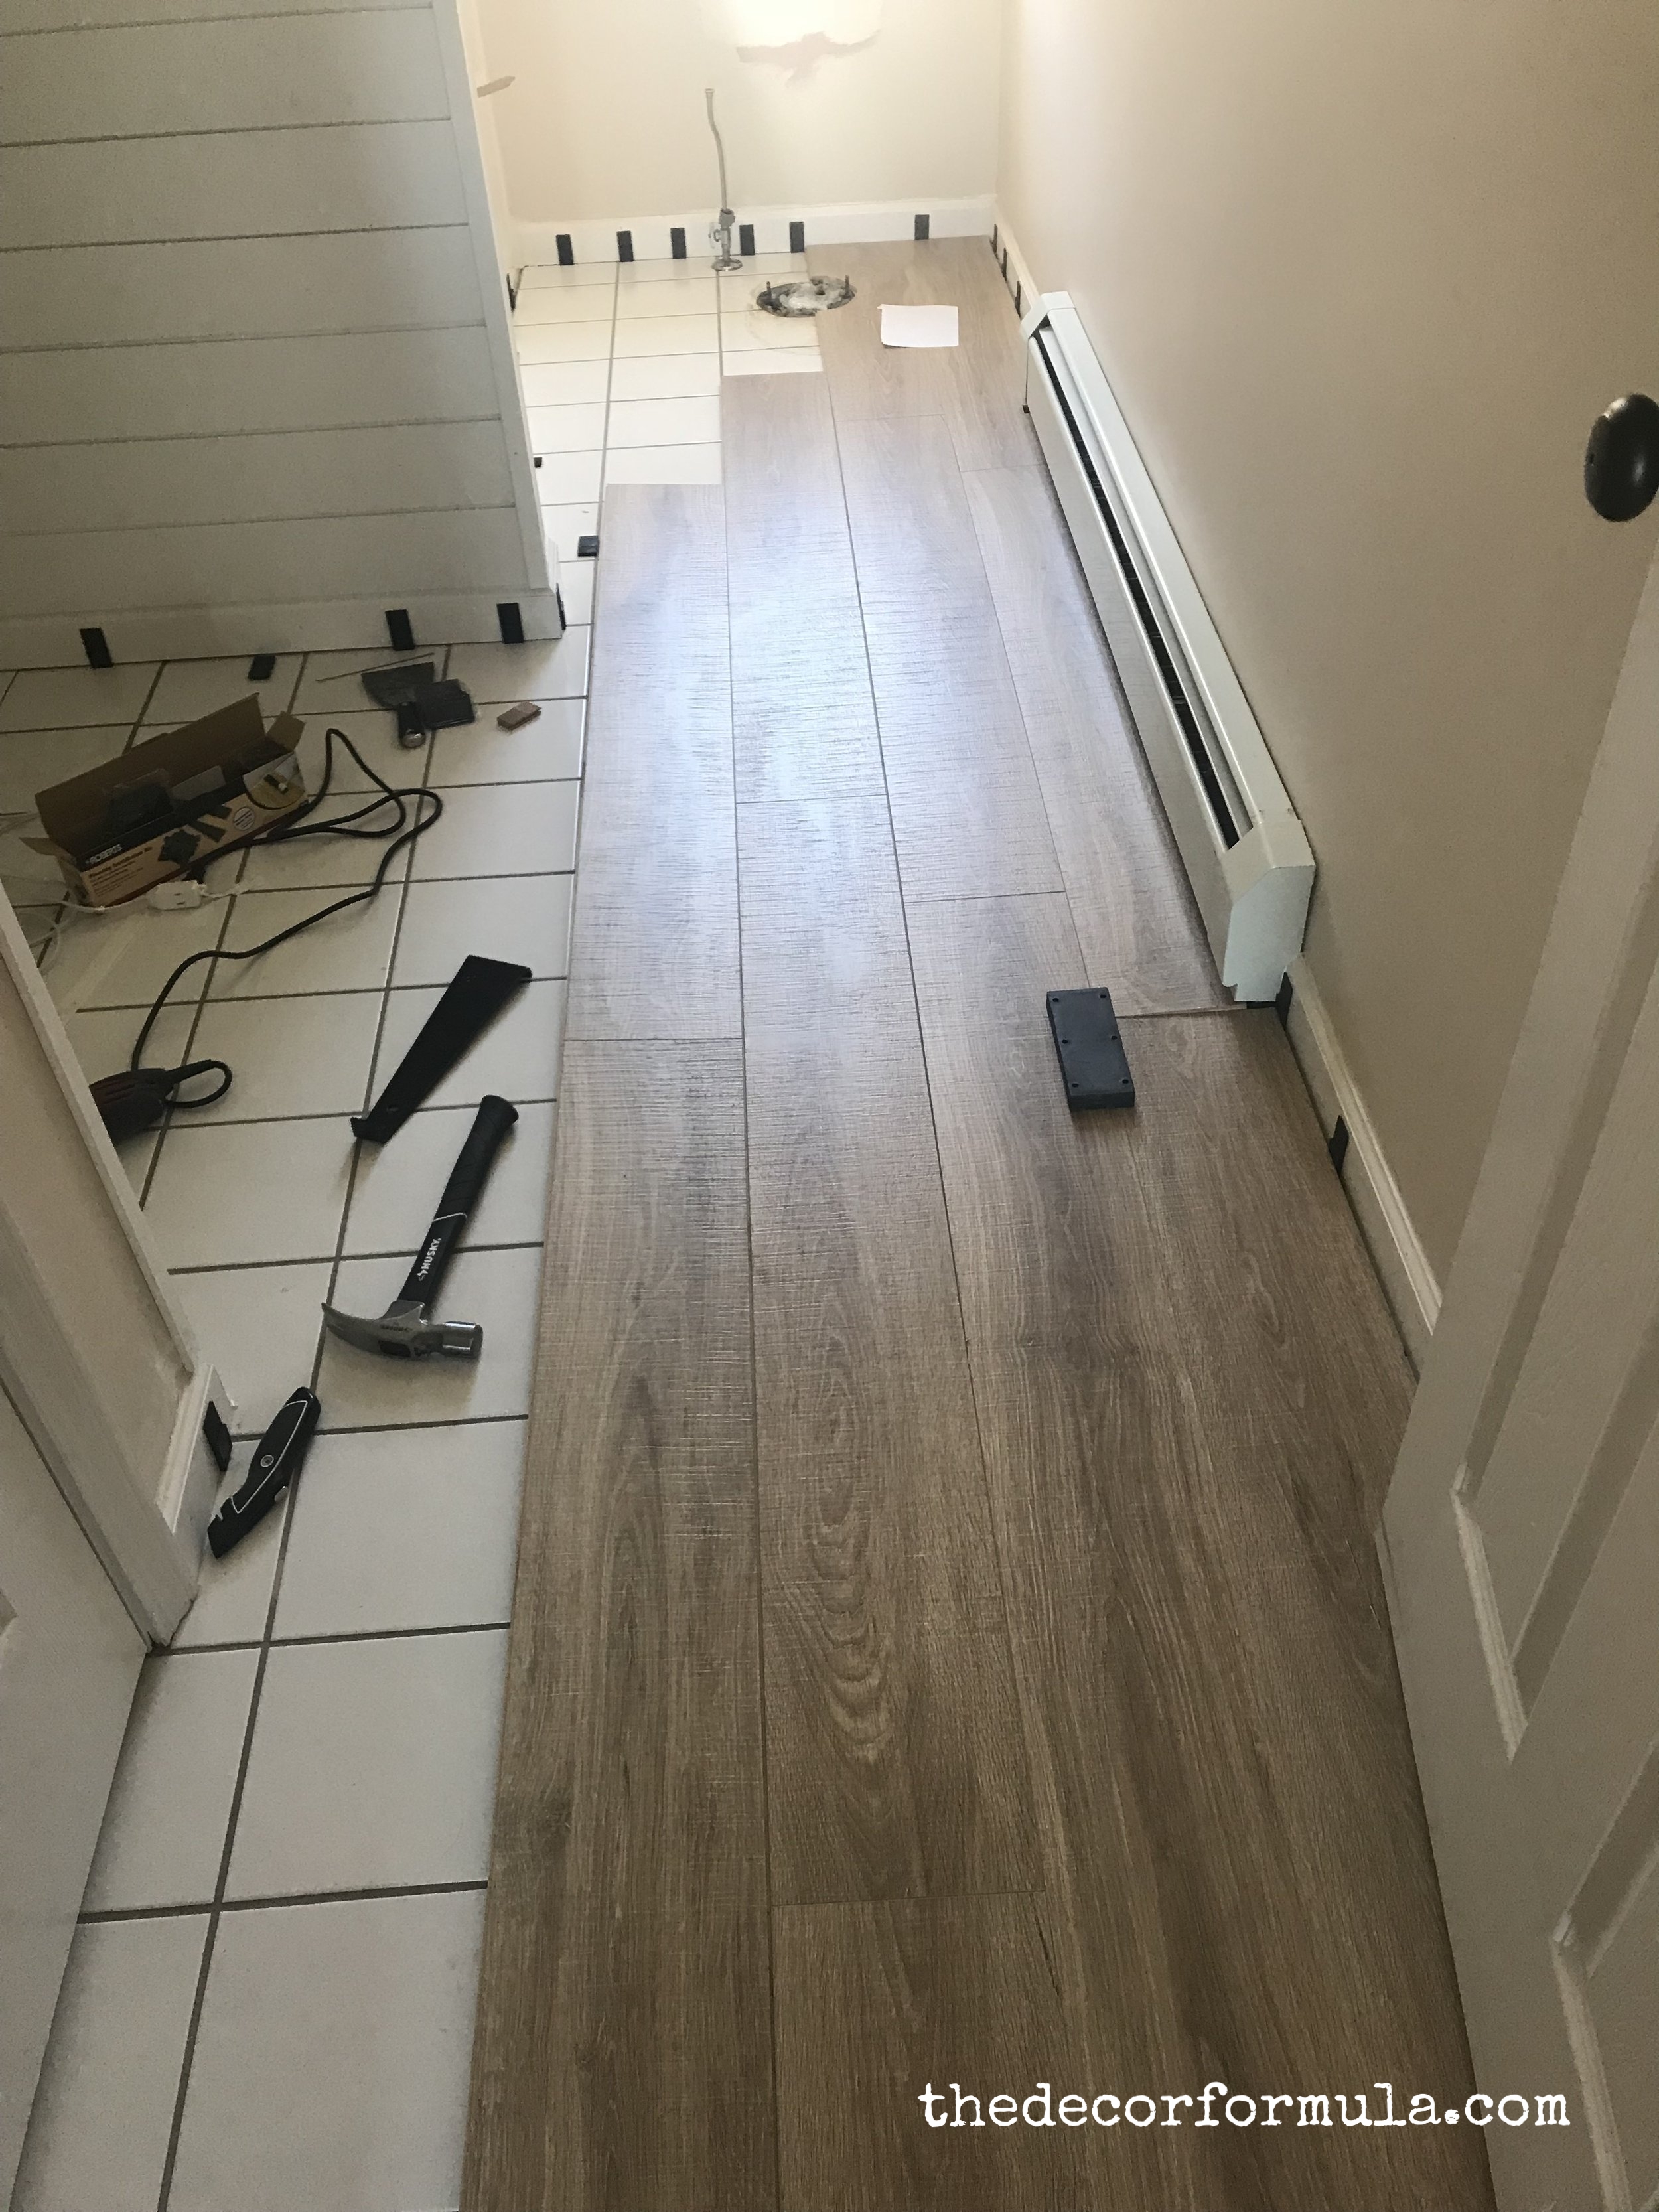 Ideas For Covering Up Tile Floors, Laying Vinyl Floor Tiles Over Existing Tiles